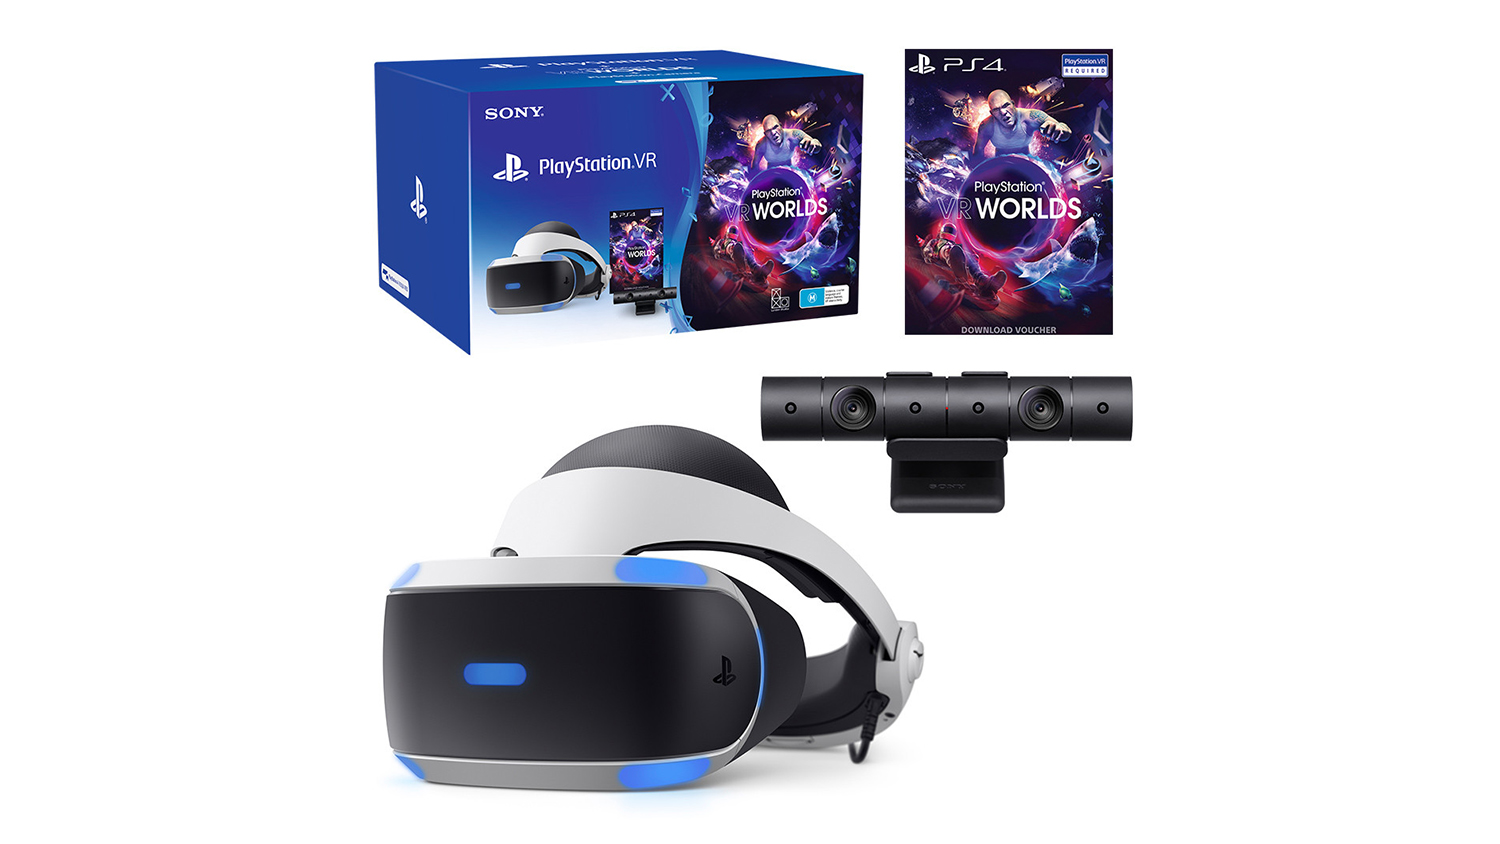 ps4 vr package